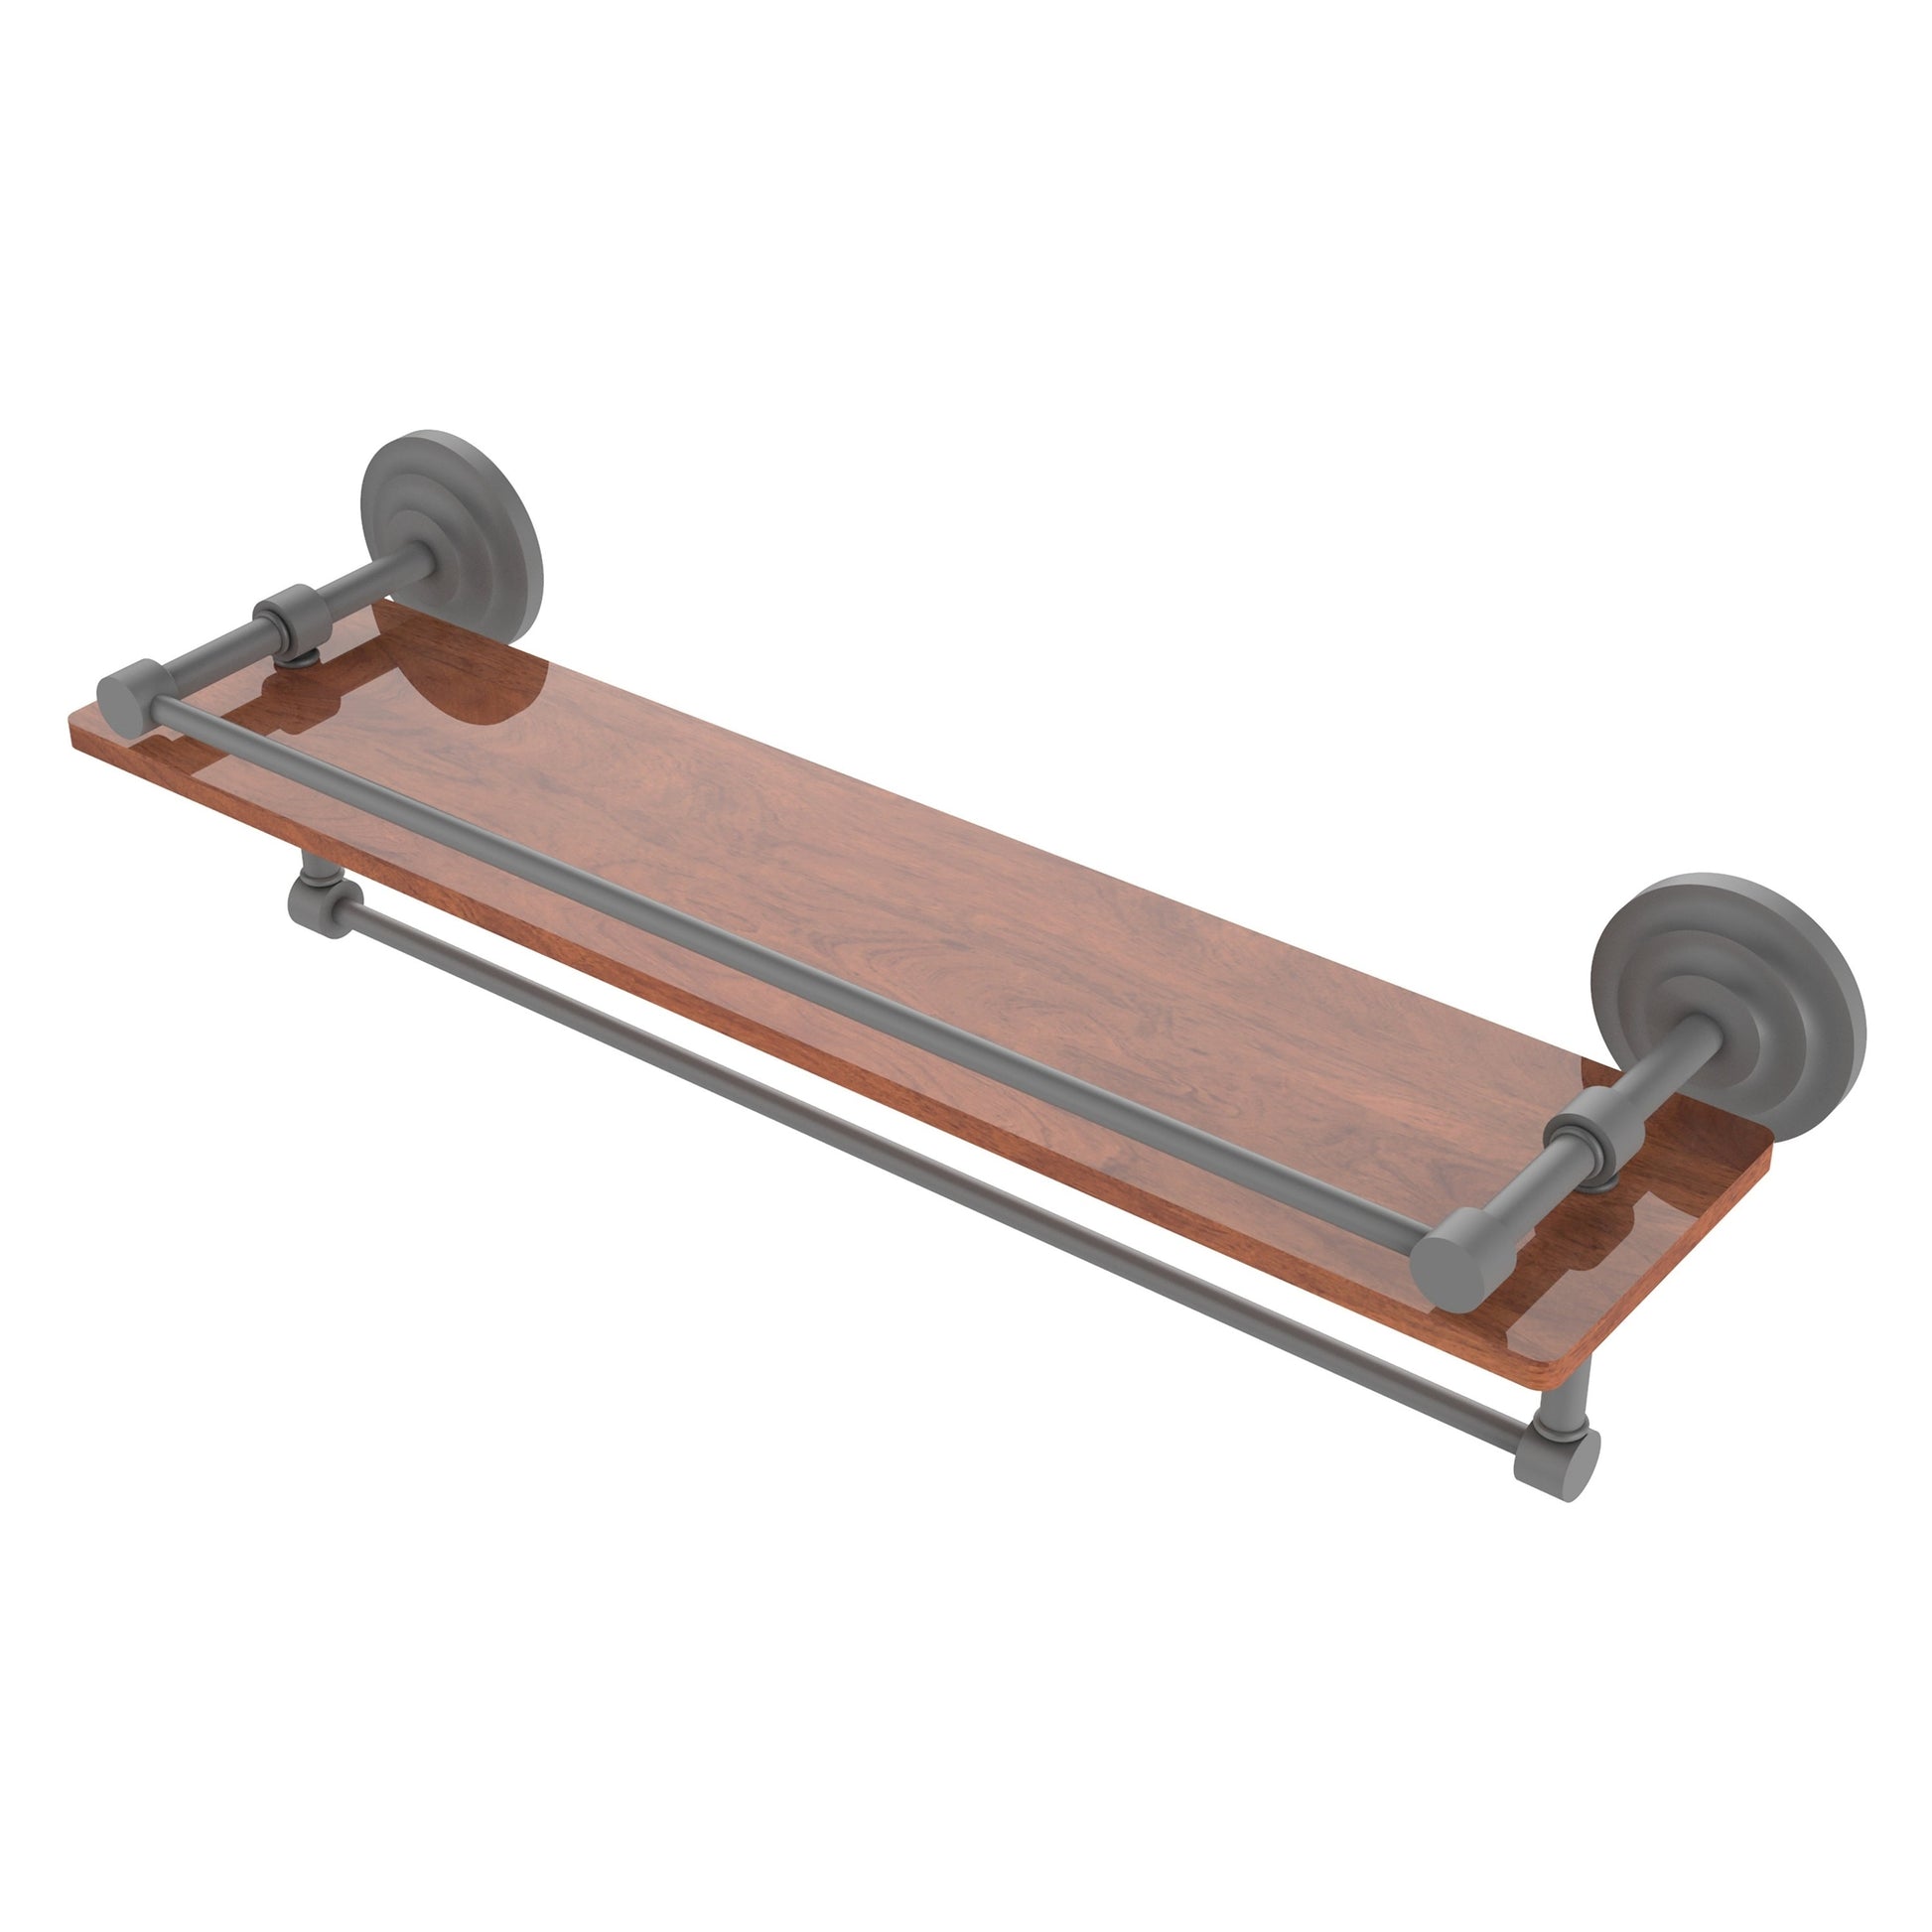 Allied Brass Que New 22" x 5" Matte Gray Solid Brass 22-Inch IPE Ironwood Shelf With Gallery Rail and Towel Bar